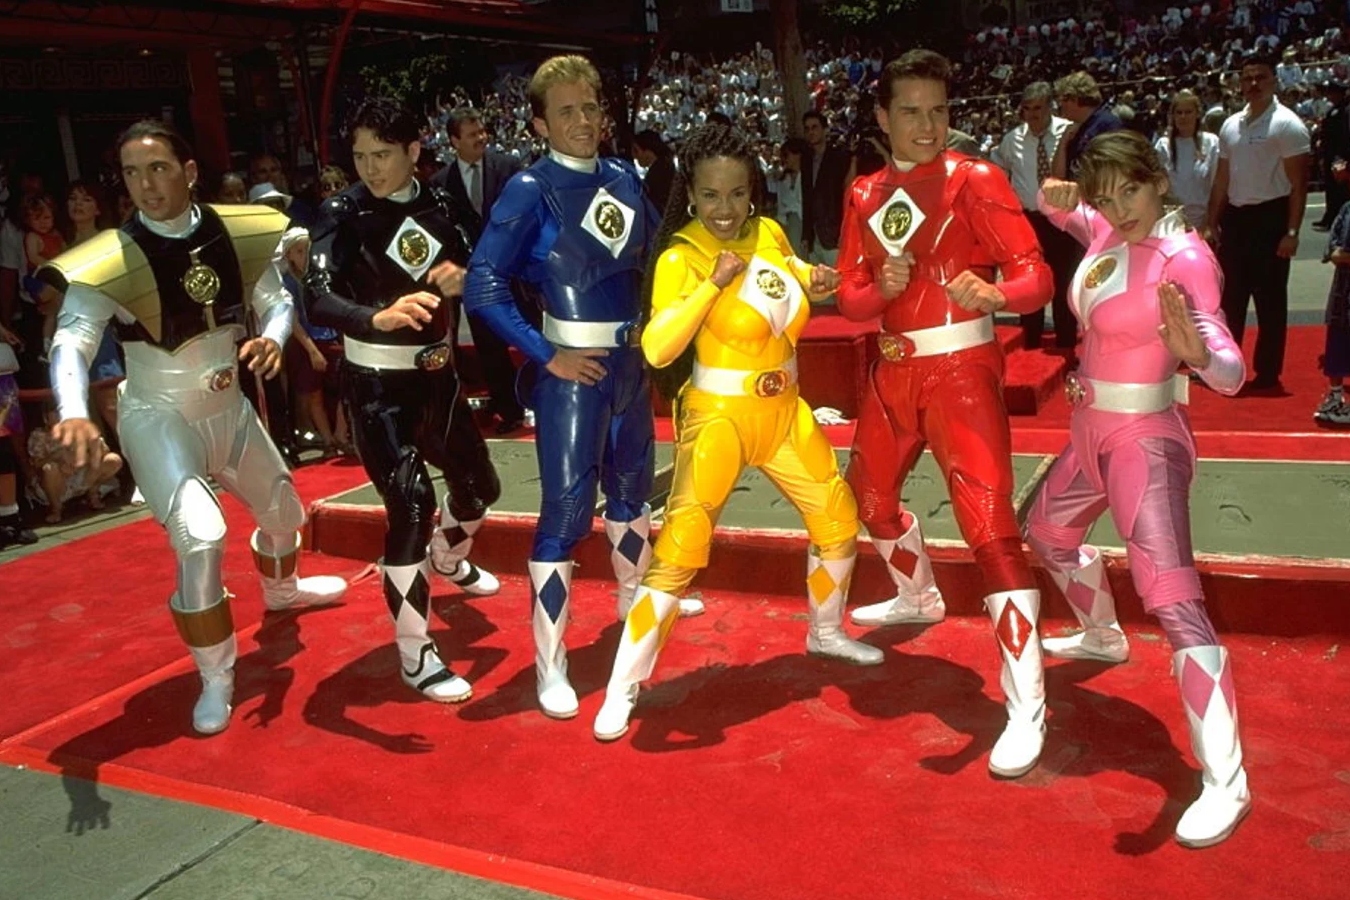 BLUE RANGER HAD WOES…AND SERIOUS ALLEGATIONS TO MAKE